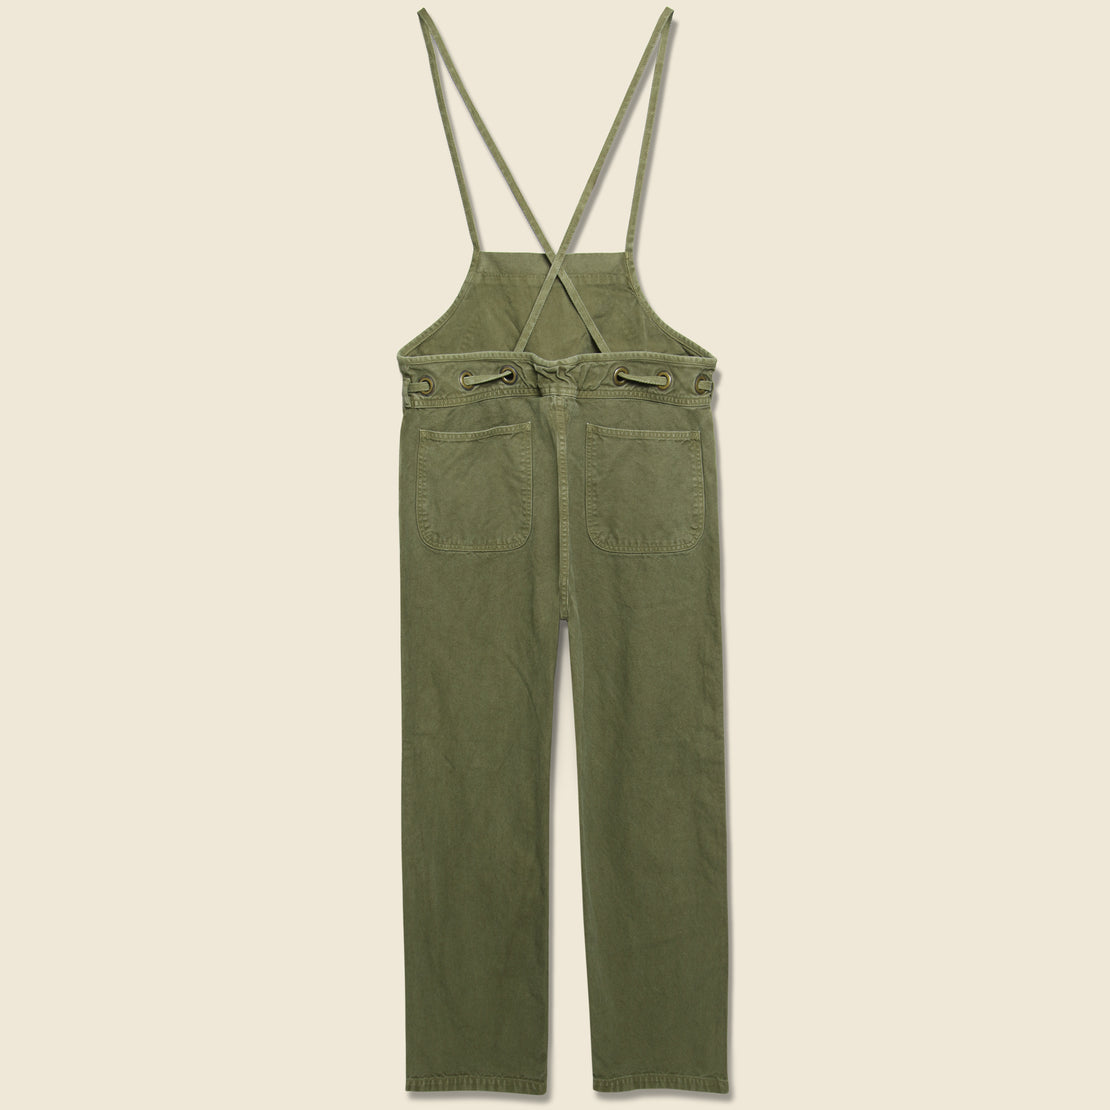 Lightweight Canvas Welder Overall - Khaki - Kapital - STAG Provisions - W - Onepiece - Overalls